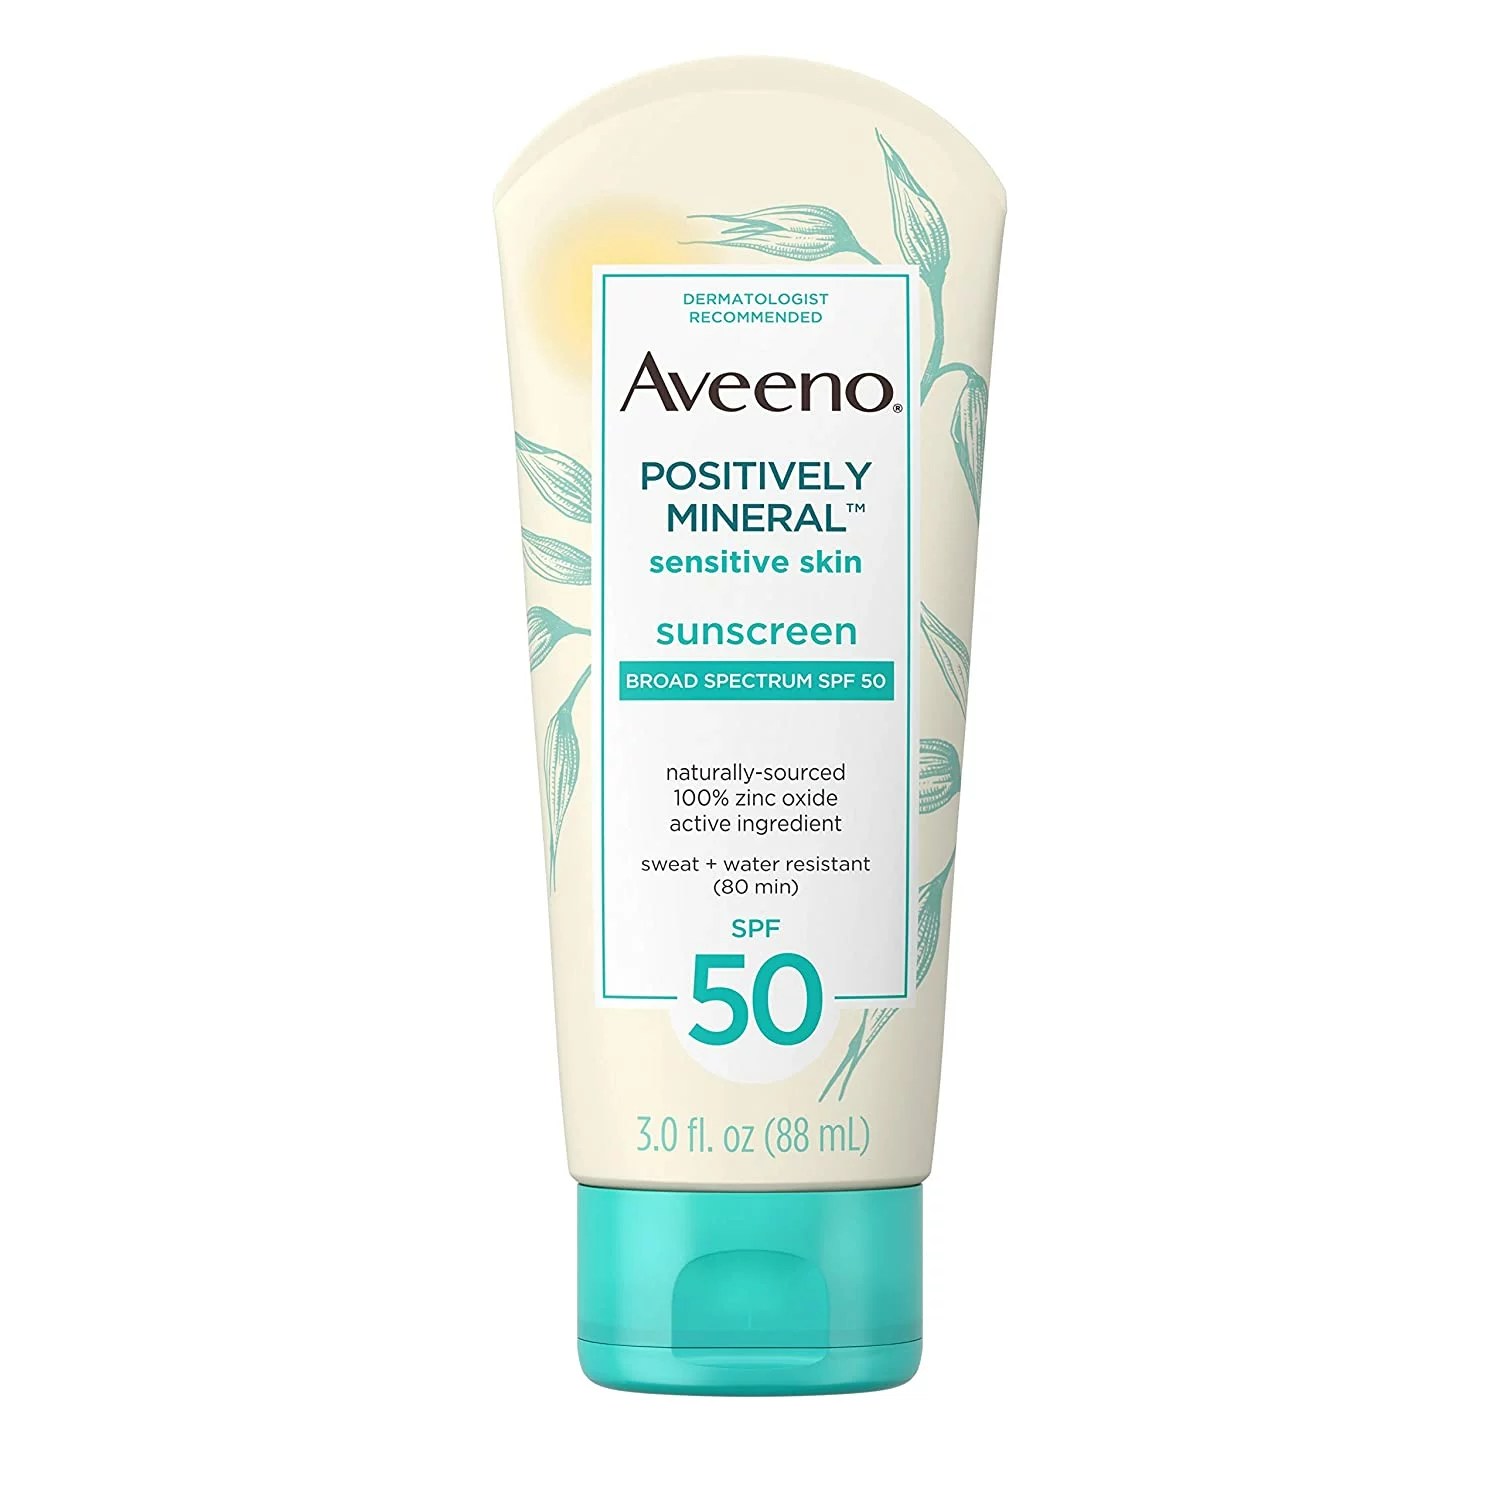 Aveeno Positively Mineral Sensitive Skin Daily Sunscreen Lotion with SPF 50, best sunscreens for sensitive skin